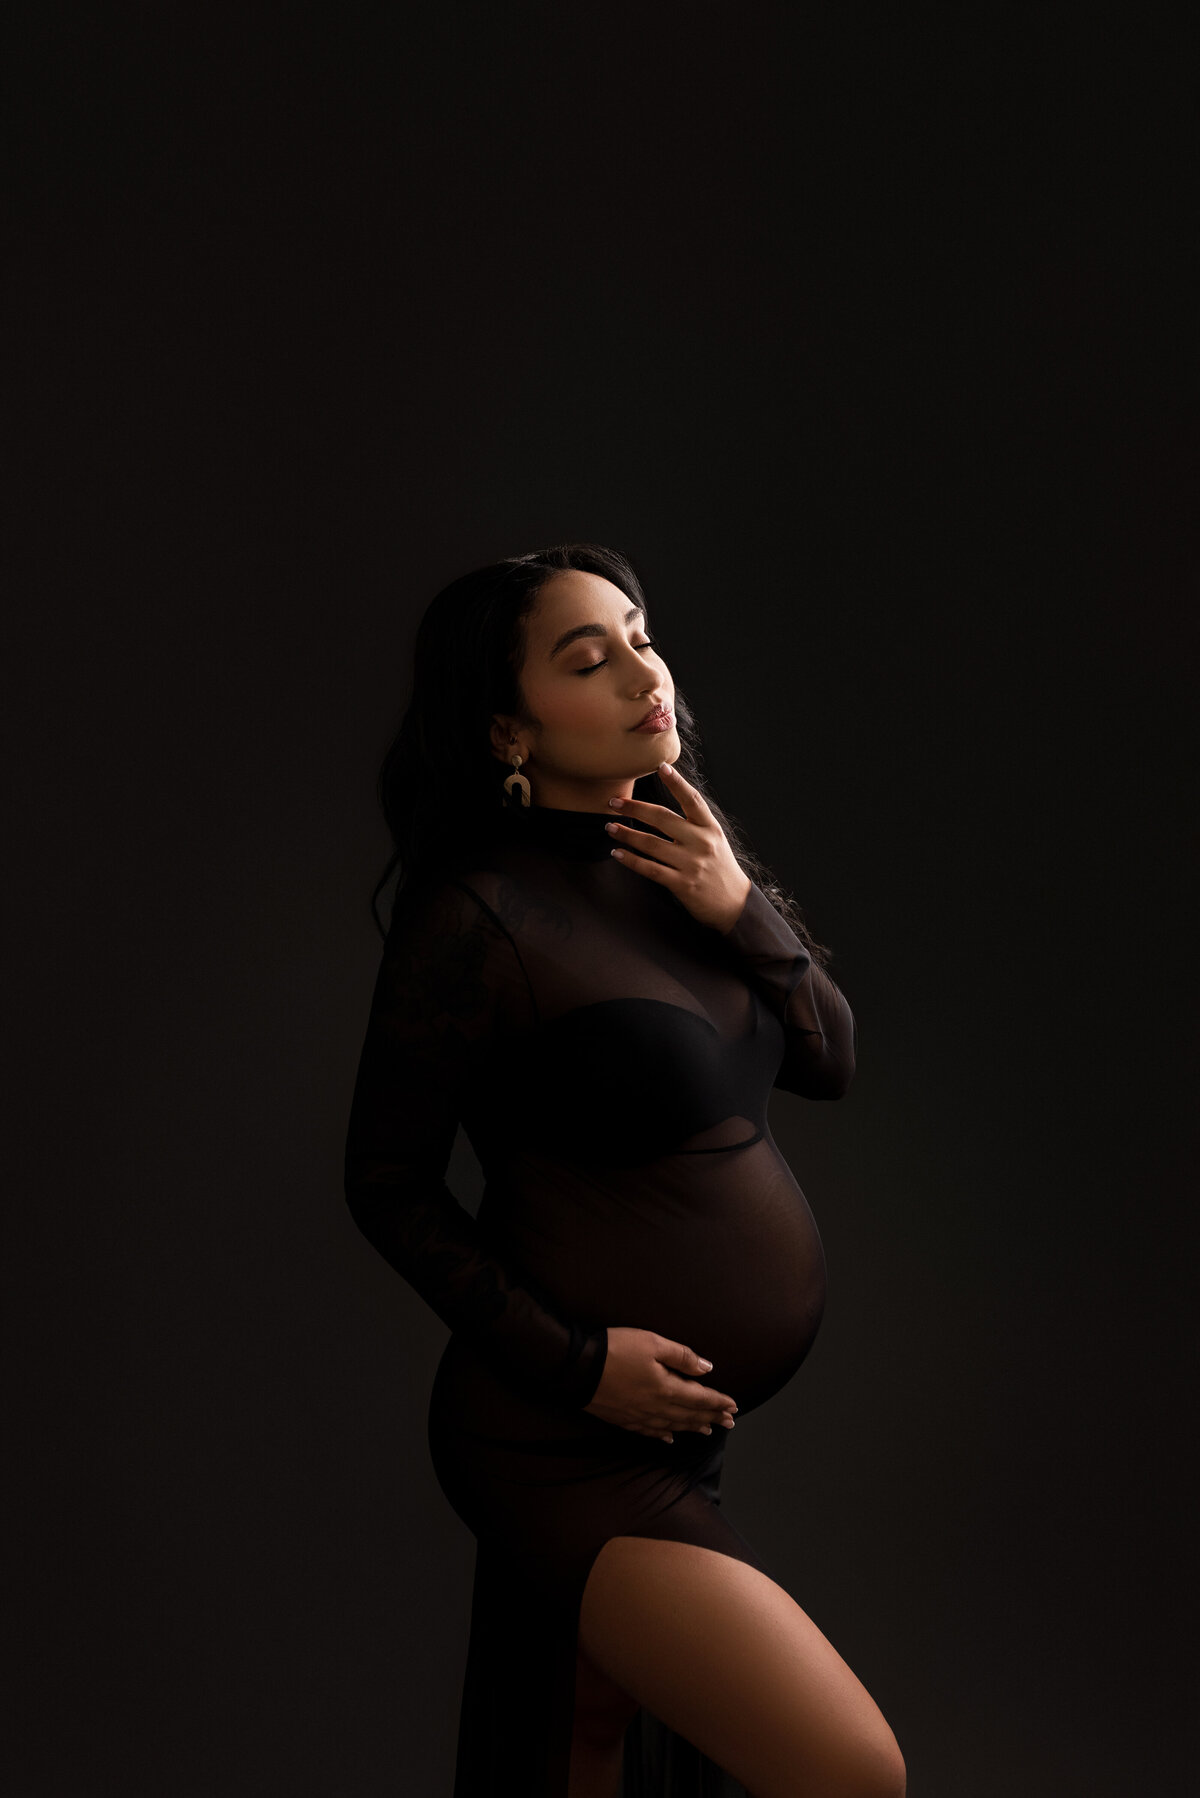 Maternity photo captured by Katie Marshall, a leading maternity photographer in New Jersey. The image features a woman standing at an angle away from the camera, adorned in a long black body-con maternity dress with a stylish slit. Her foreleg is gracefully bent, and her forearm supports her baby bump. Her back arm gently touches her chin. With closed eyes and her head tilted towards the light source, dark shadows artfully create drama and depth, resulting in a striking and emotive maternity composition.